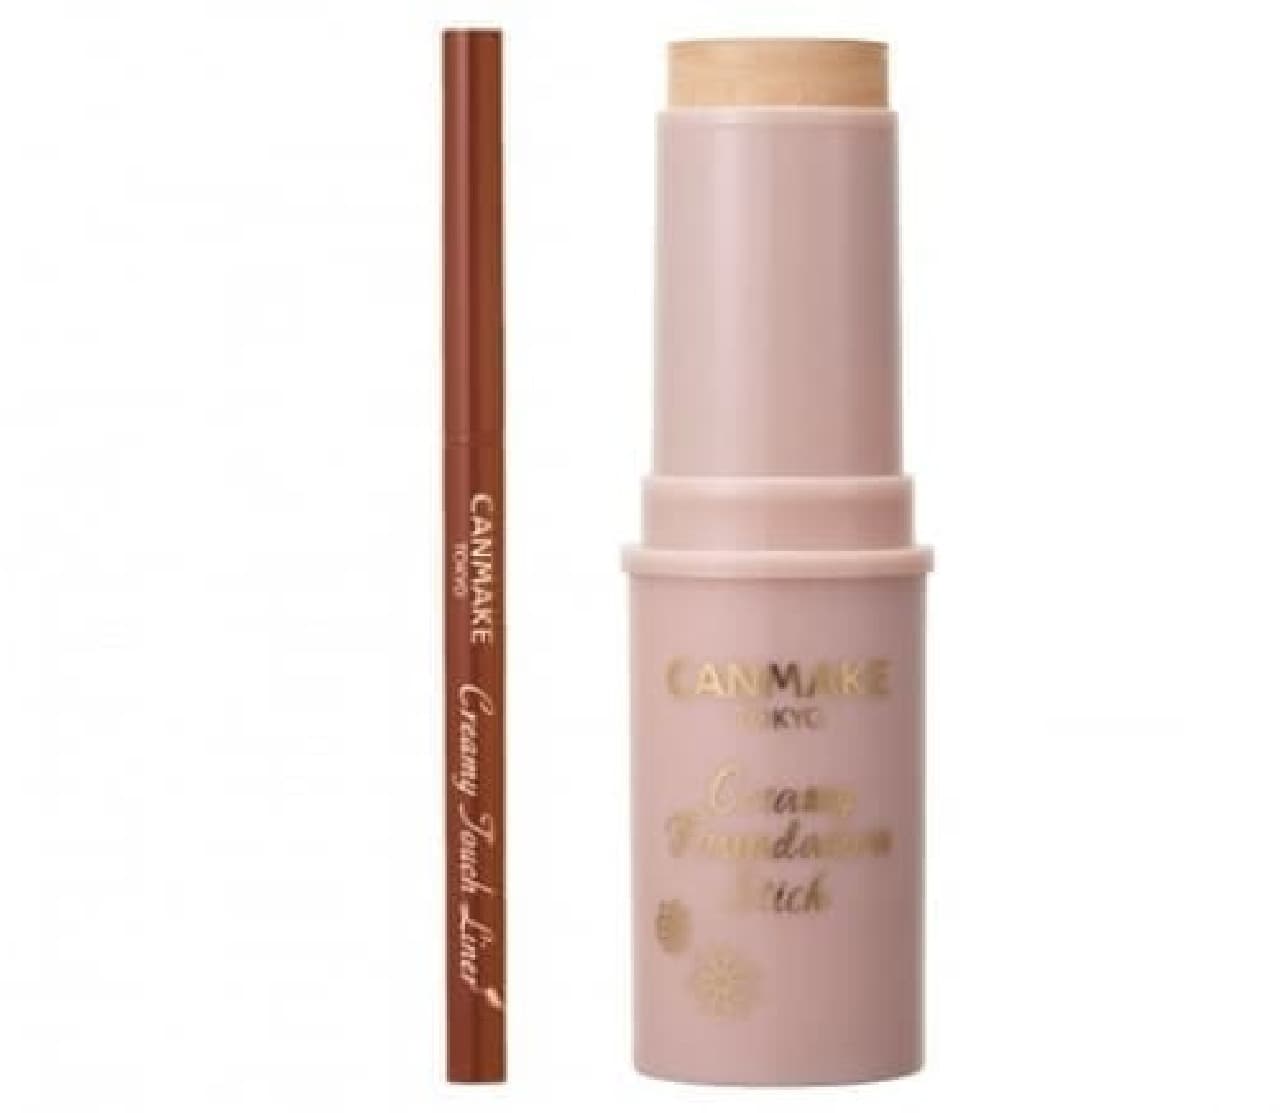 Canmake "Creamy Touch Liner" and "Creamy Foundation Stick"